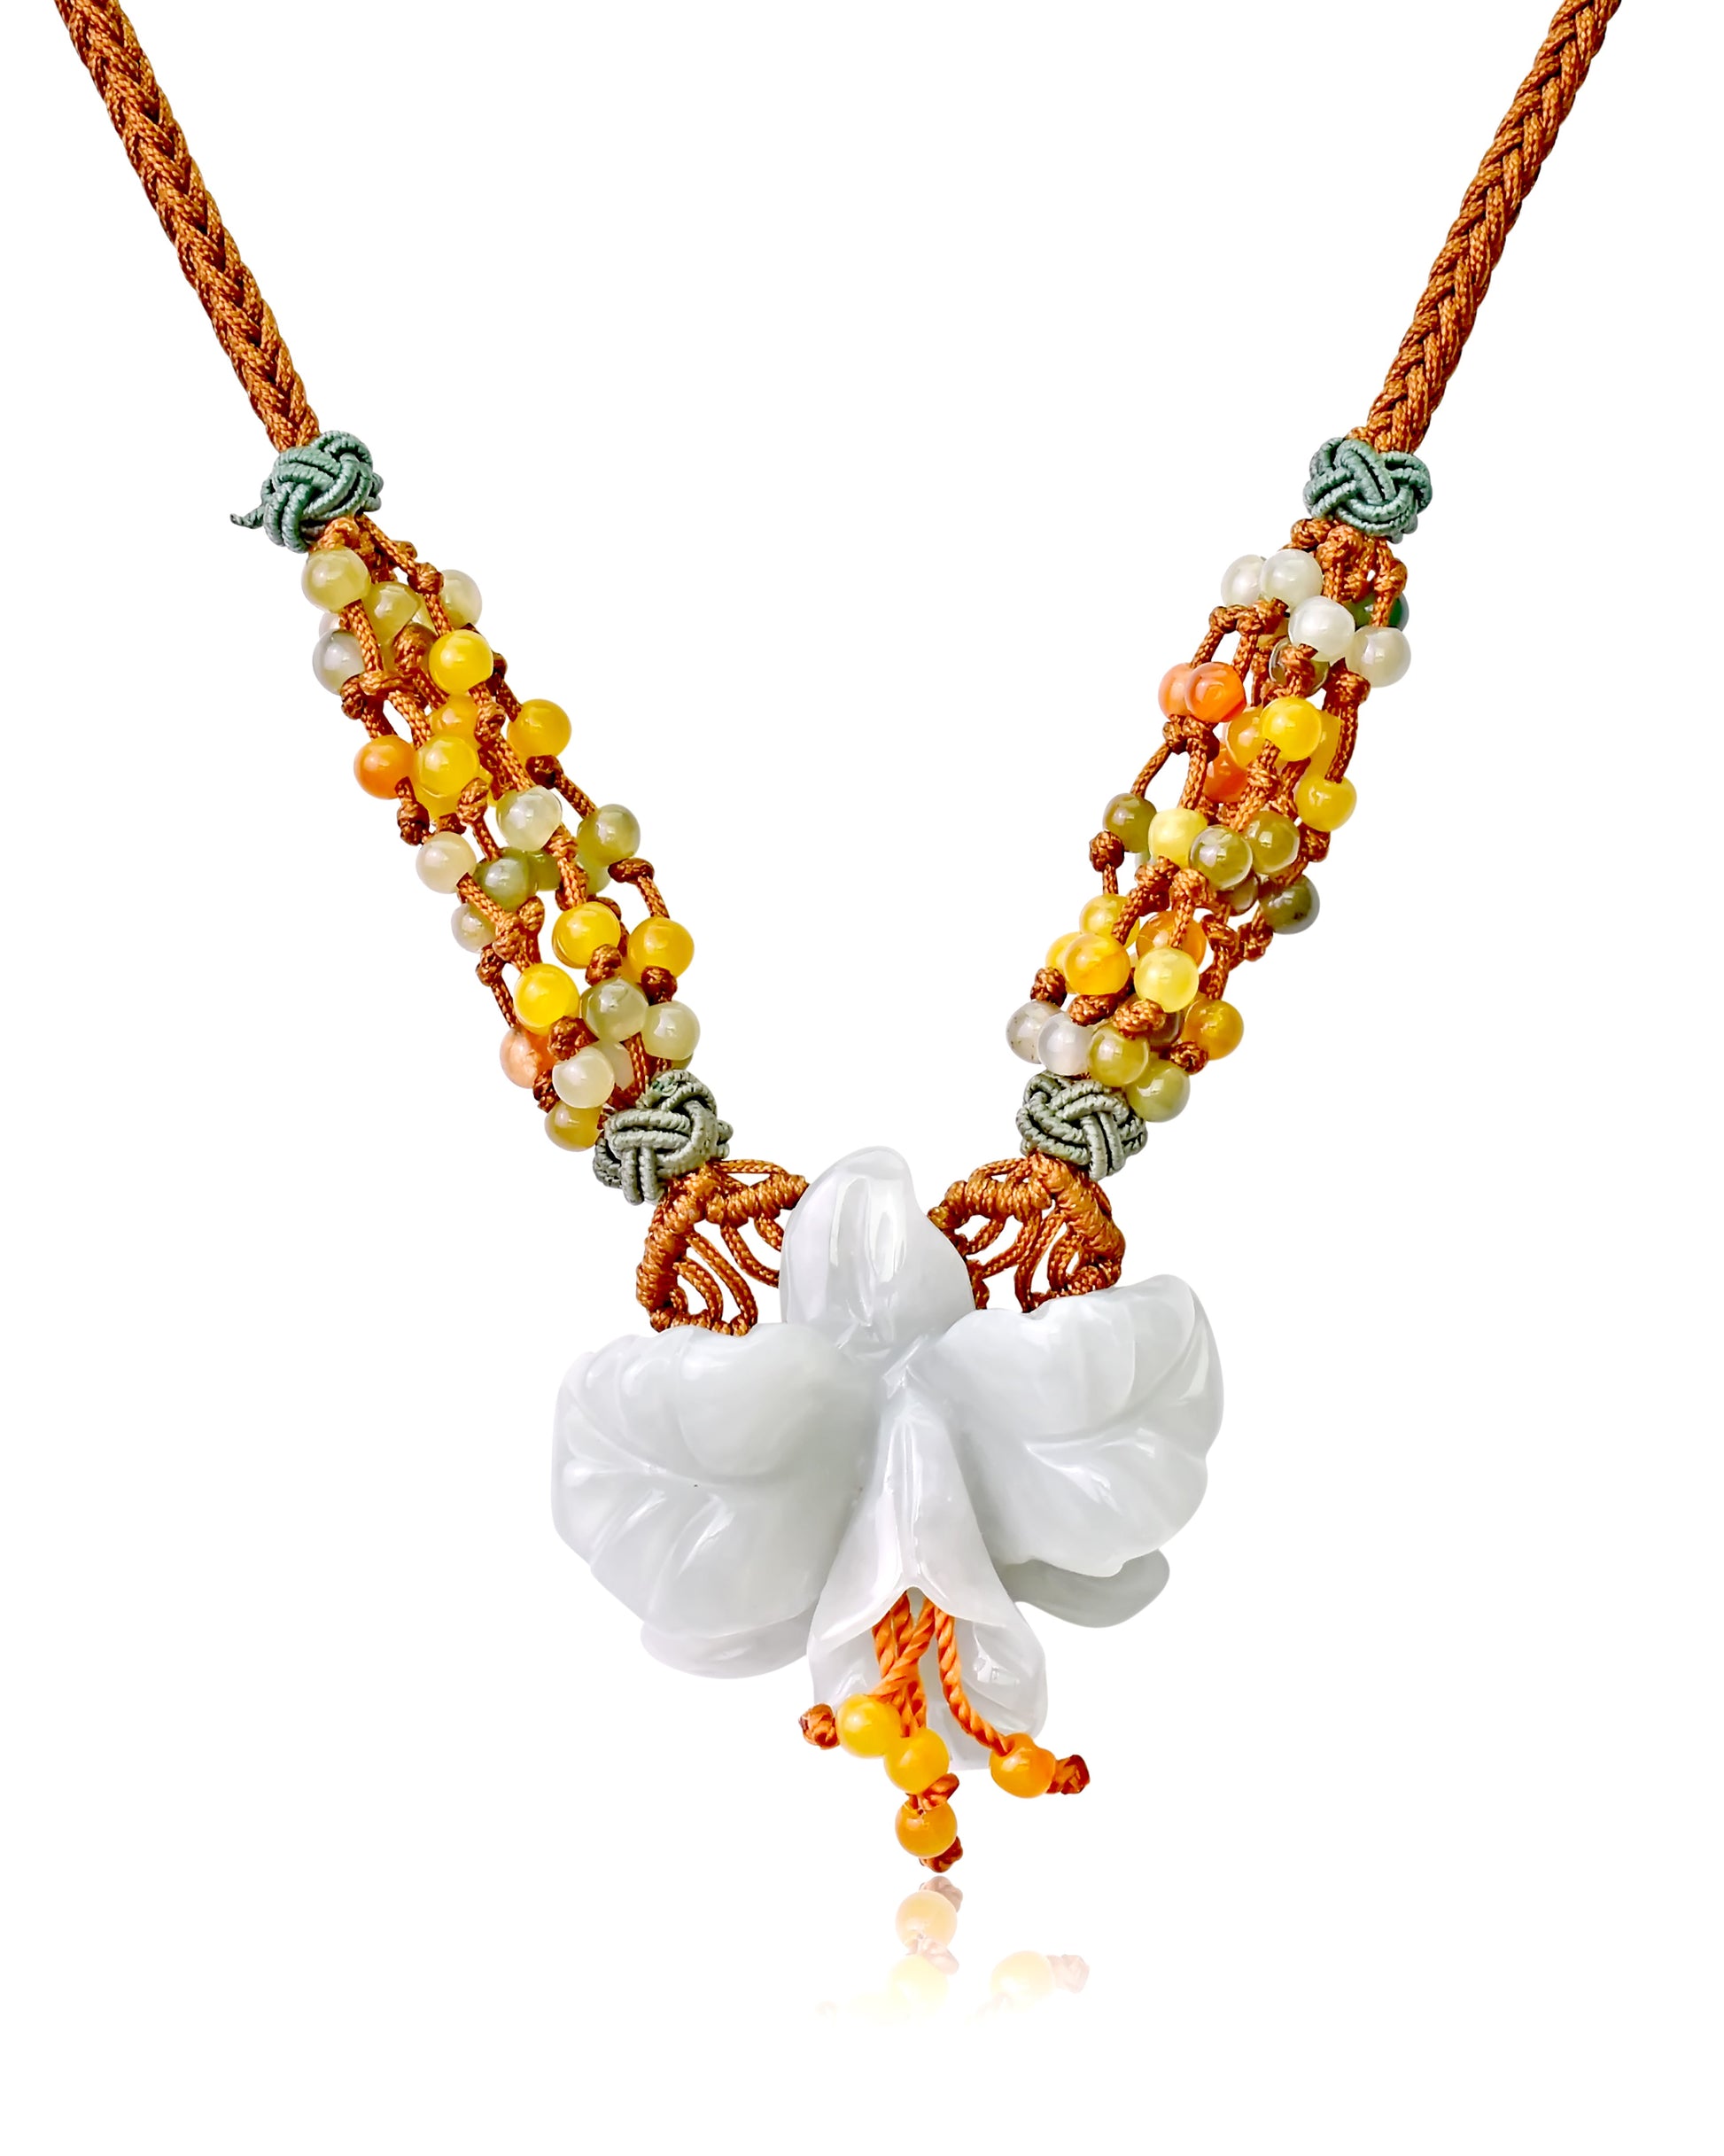 Add Elegance and Charm to Any Outfit with Iris Flower Necklace made with Tan Cord